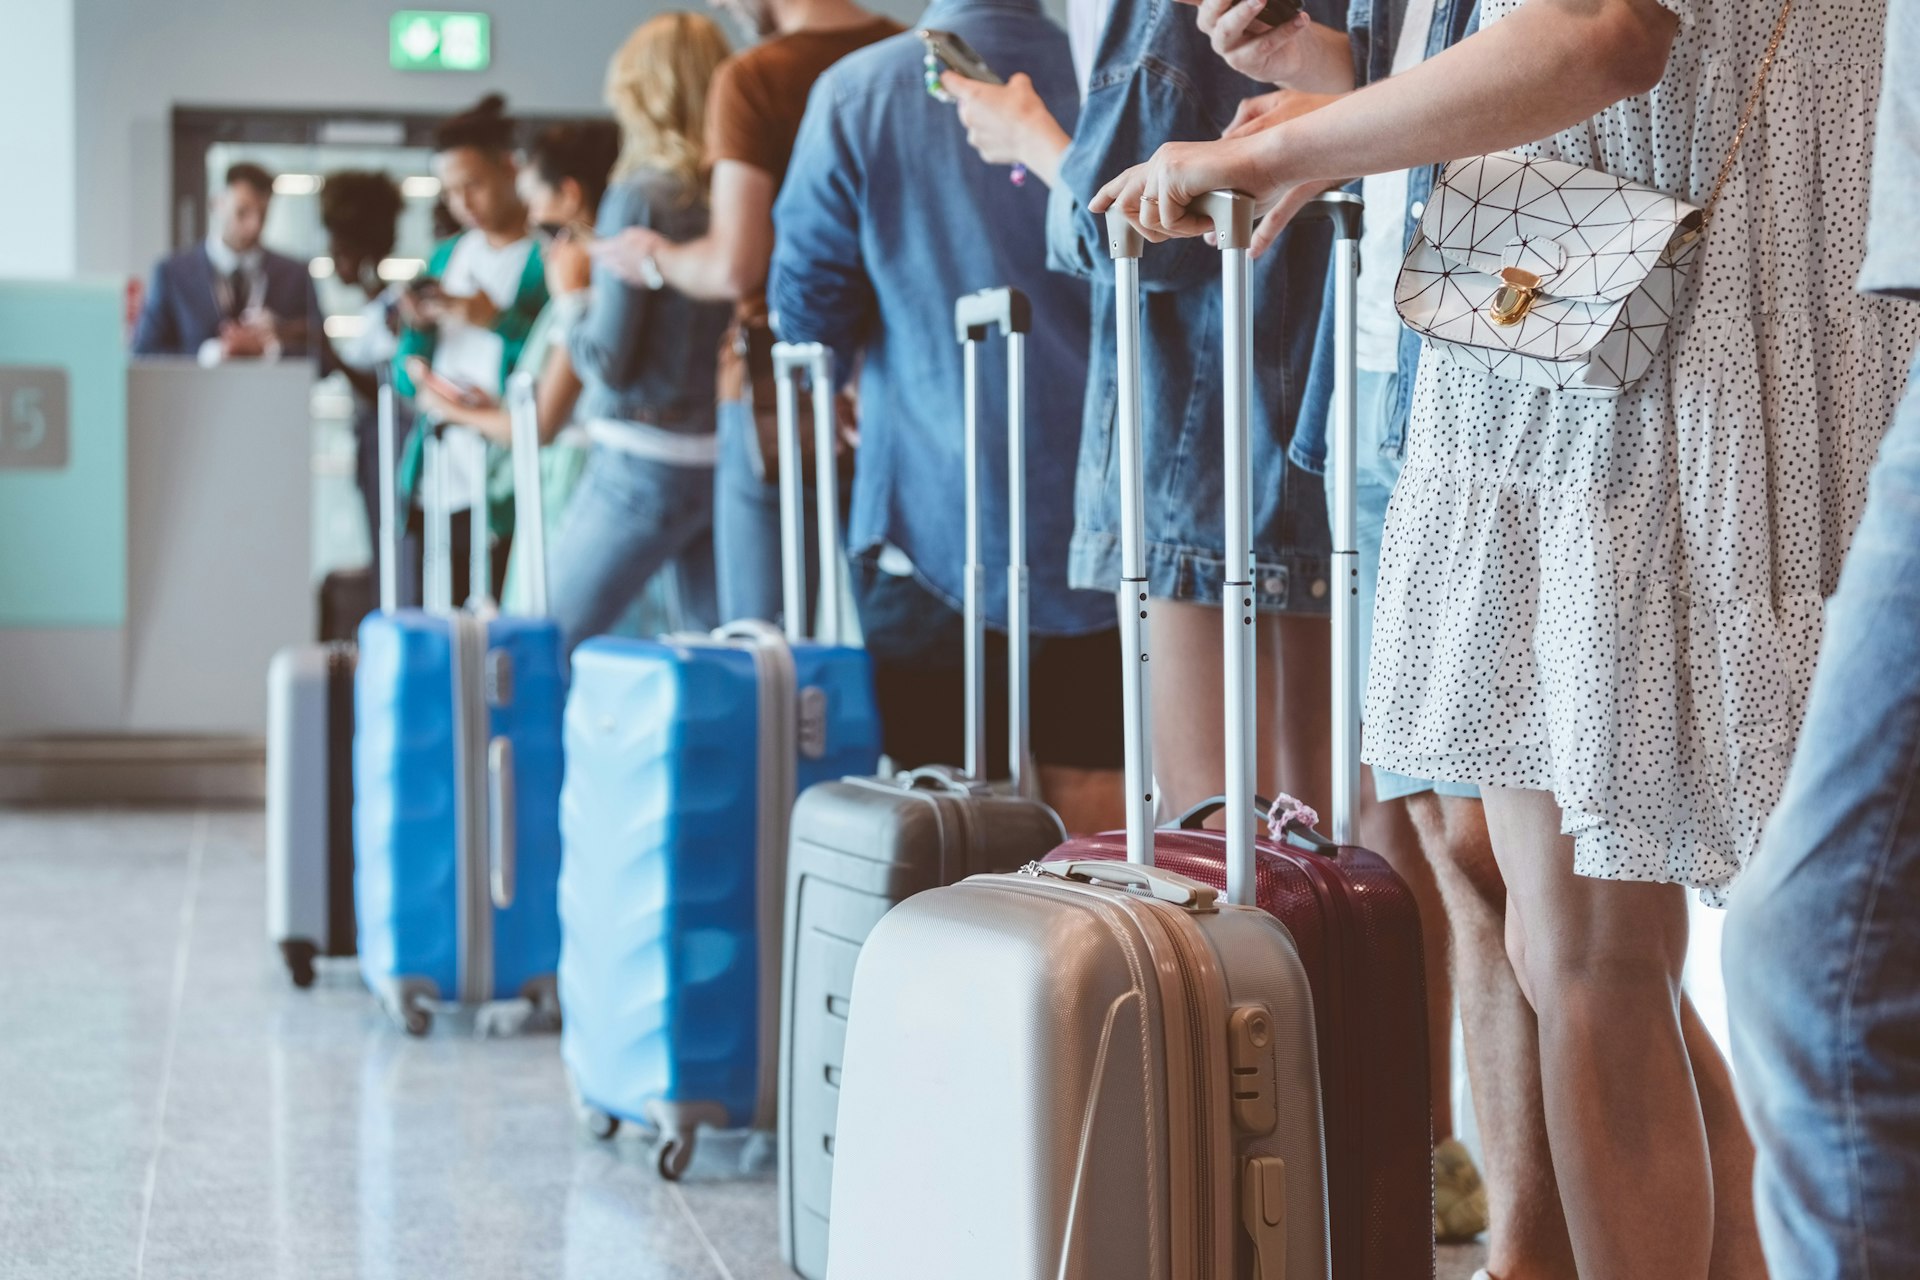 PreCheck and Clear help to avoid long lines and the headaches of airport security